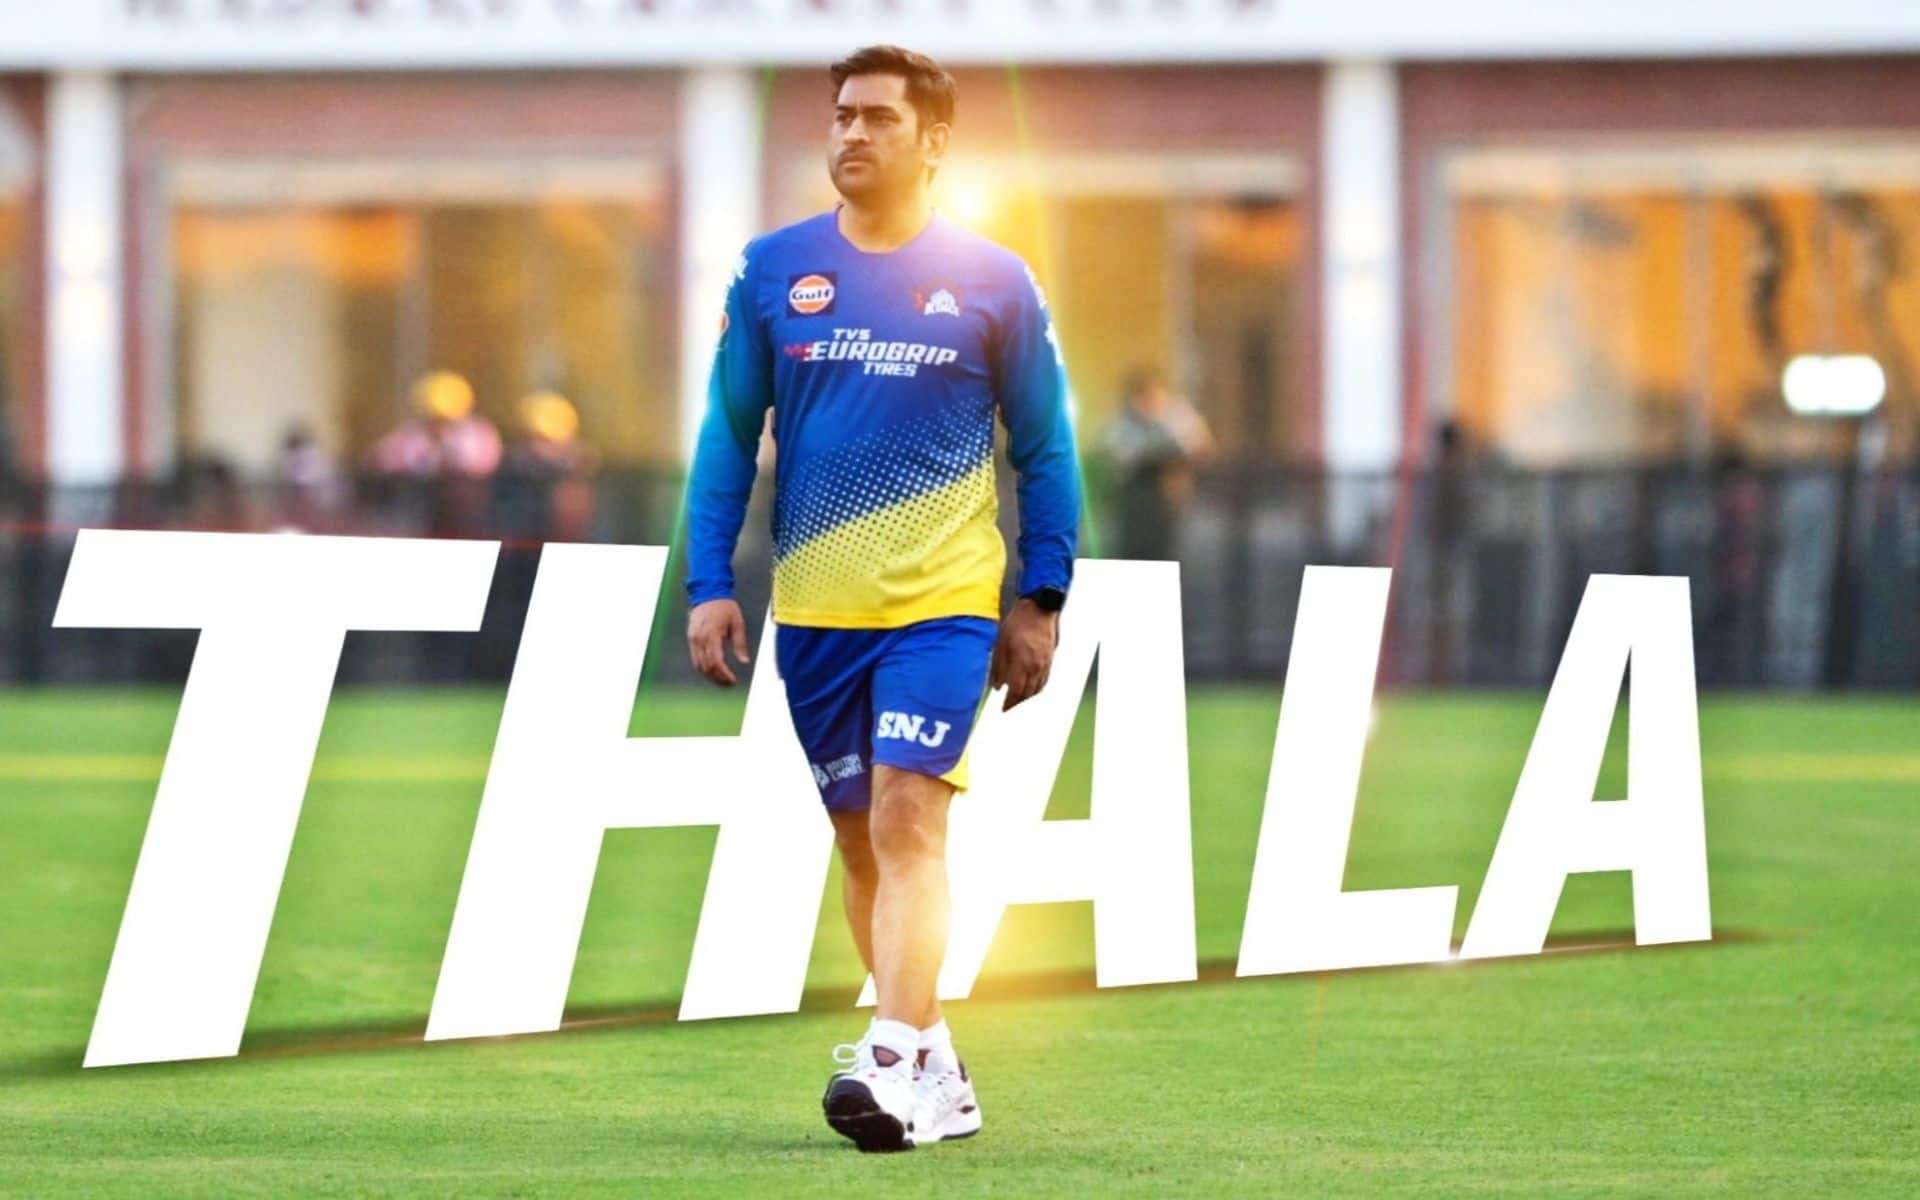 MS Dhoni is lovingly called 'Thala' by CSK fans (X.com)